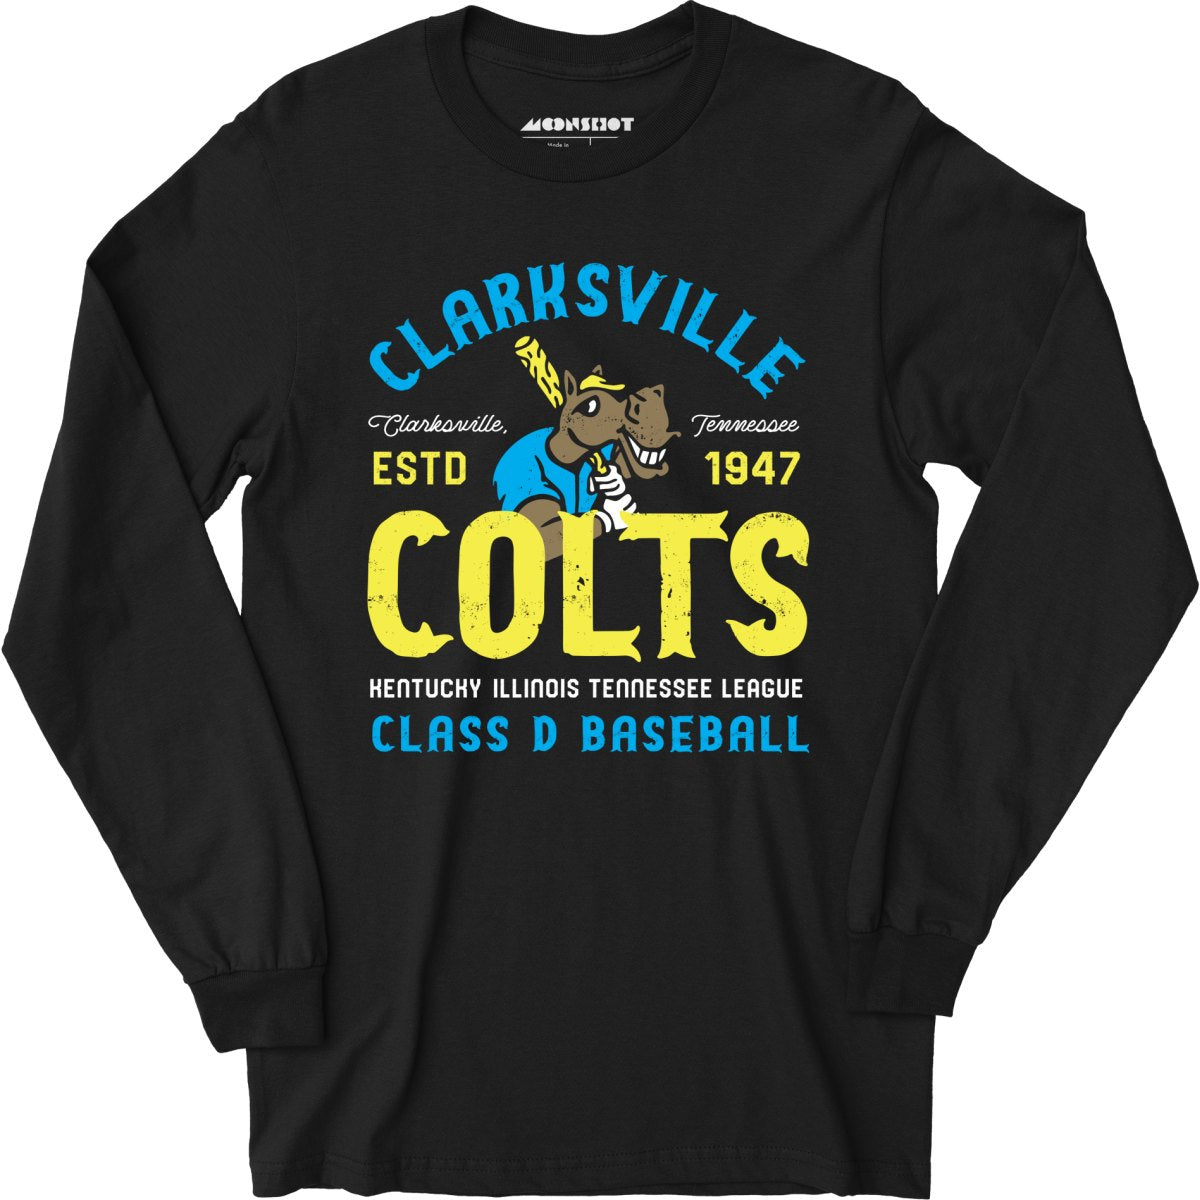 Clarksville Colts - Tennessee - Vintage Defunct Baseball Teams - Long Sleeve T-Shirt